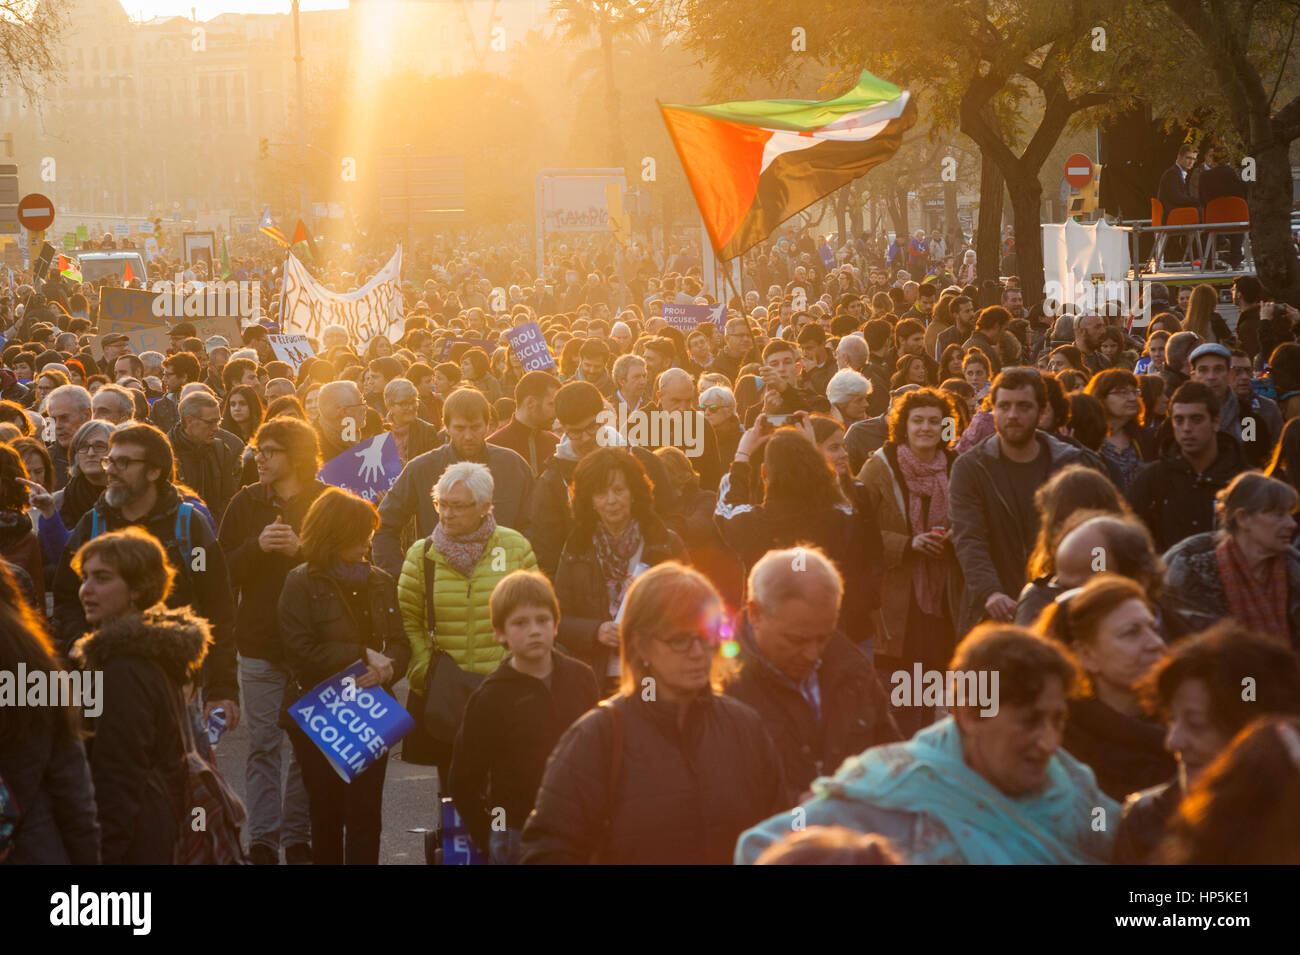 Barcelona, Spain. 18th February, 2017. Thousands of people marched in Barcelona to demand Spain's government to increase its efforts to take in refugees who have fled the war in Syria and other violent conflicts. Credit: Charlie Perez/Alamy Live News Stock Photo